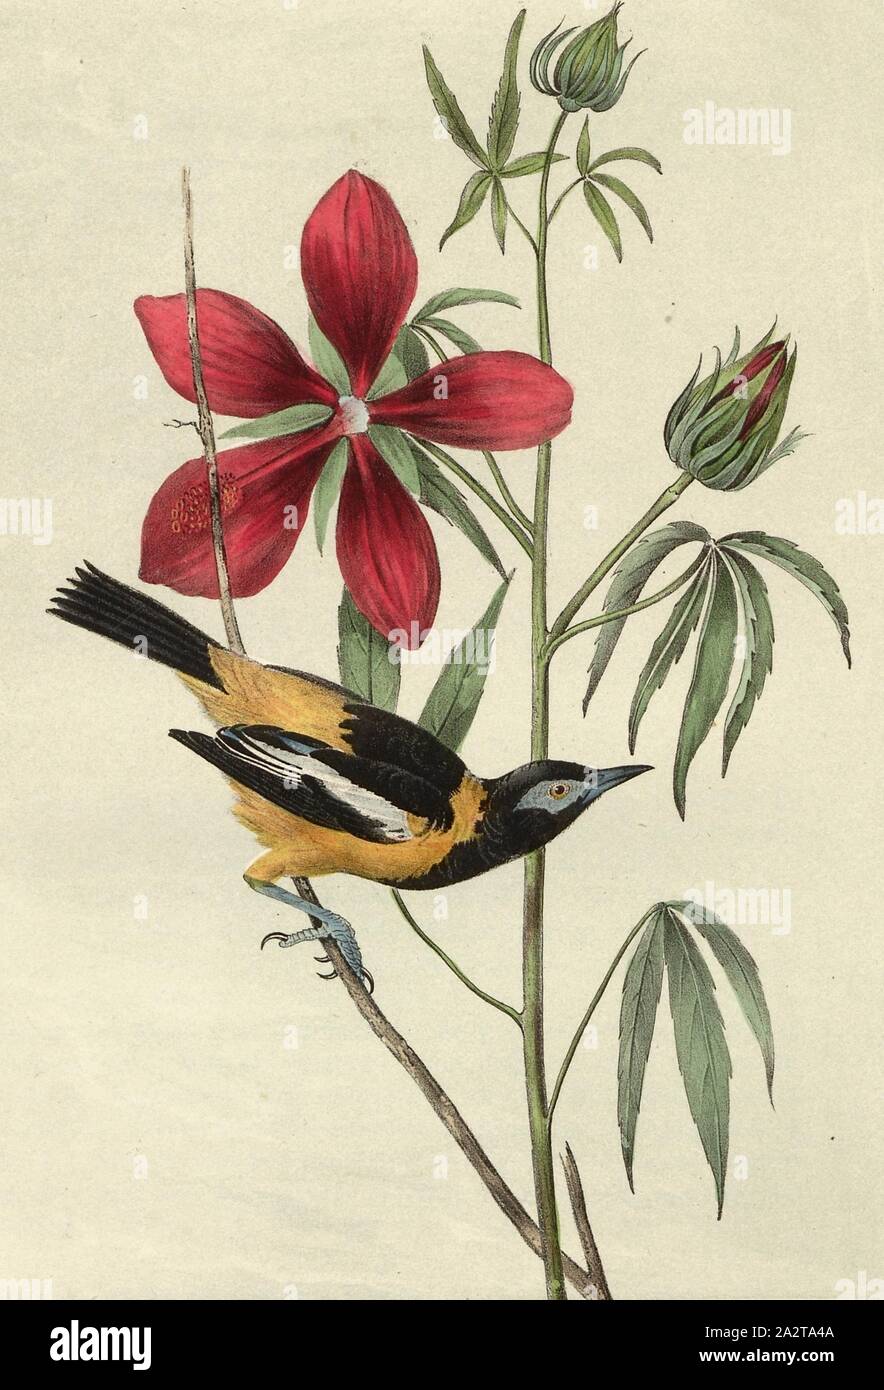 Common Troupial, Sparrow (Icterus vulgaris), Signed: J.J. Audubon, J.T. Bowen, lithograph, Pl. 499 (vol. 7), Audubon, John James (drawn); Bowen, J. T. (lith.), 1856, John James Audubon: The birds of America: from drawings made in the United States and their territories. New York: Audubon, 1856 Stock Photo